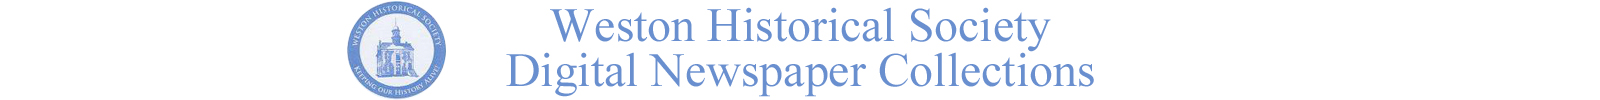 Weston Historical Society Digital Newspaper Collections